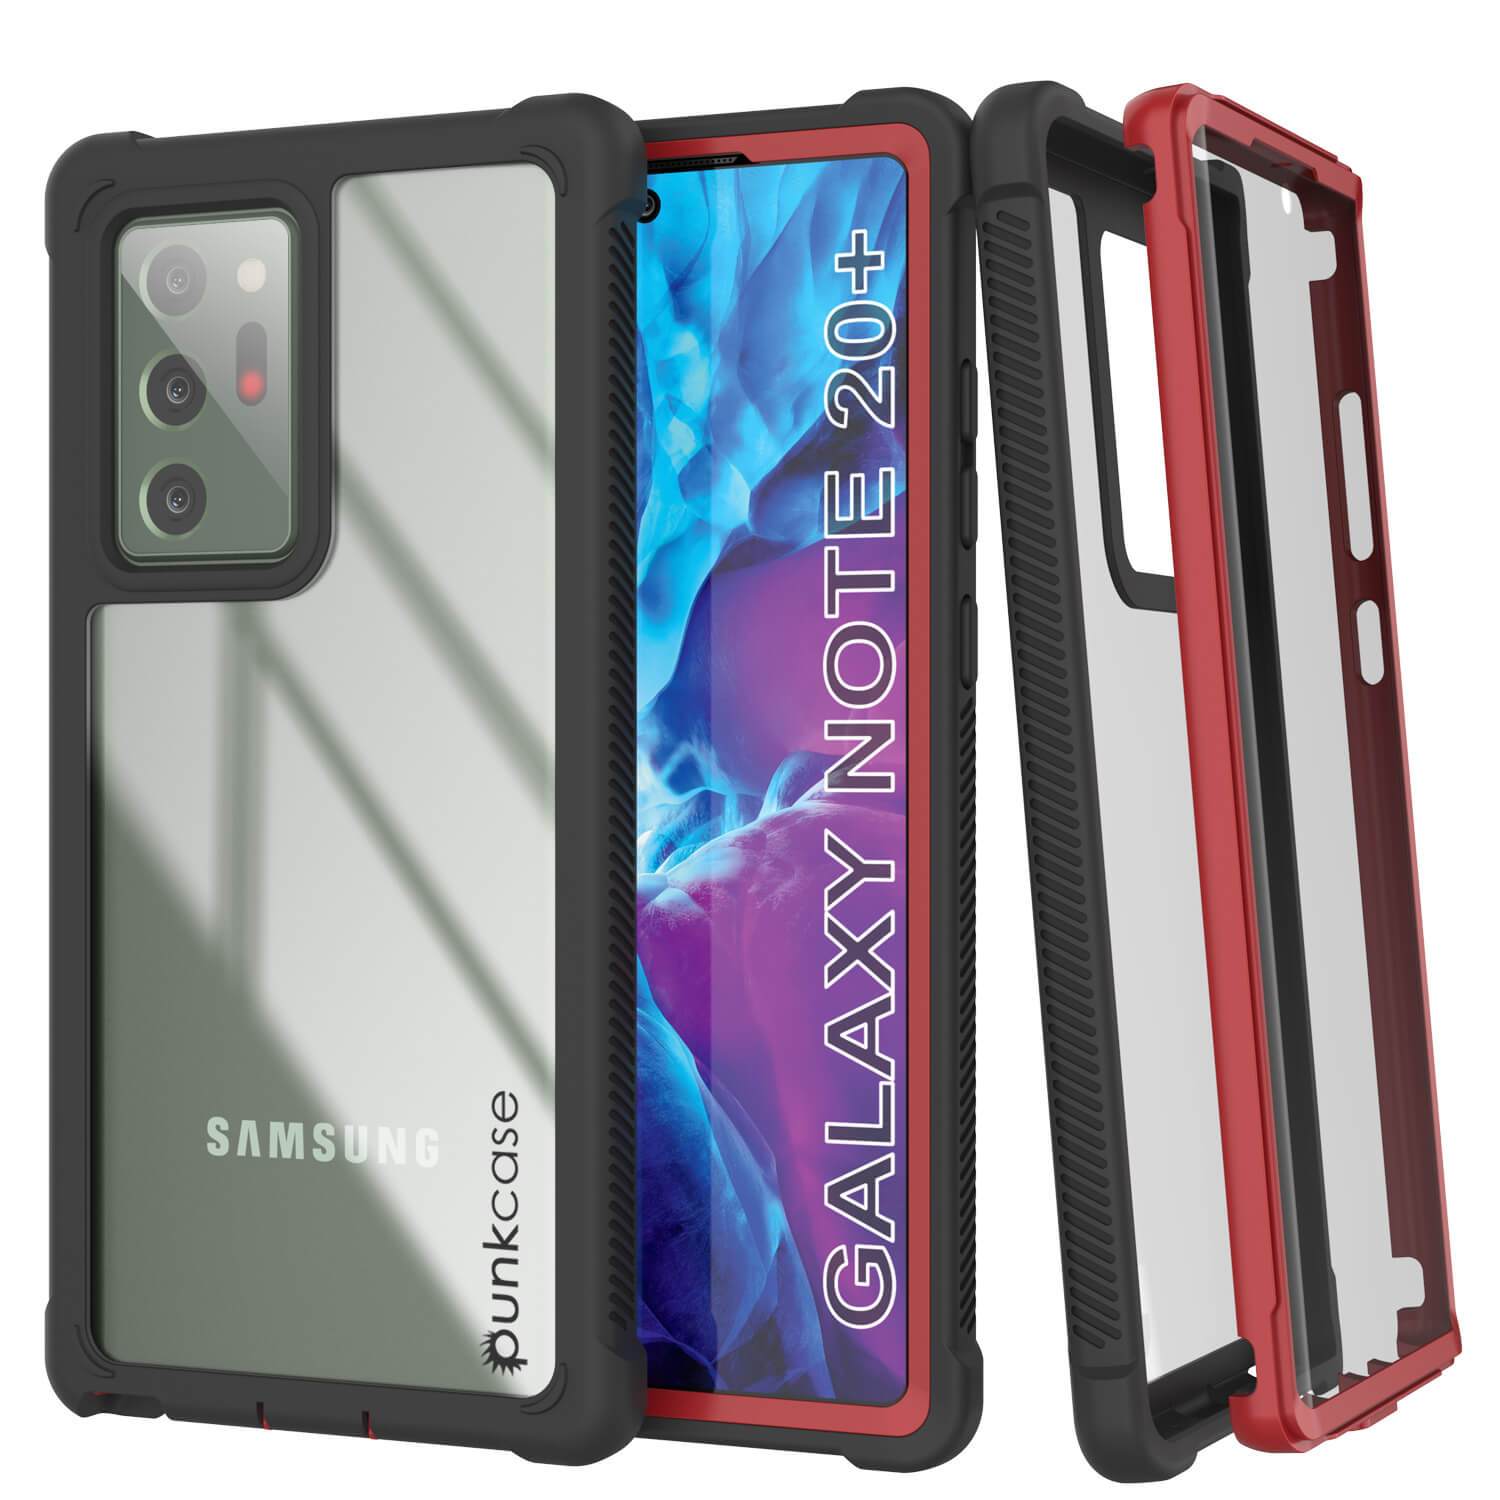 Punkcase Galaxy Note 20 Ultra Case, [Spartan Series] Red Rugged Heavy Duty Cover W/Built in Screen Protector